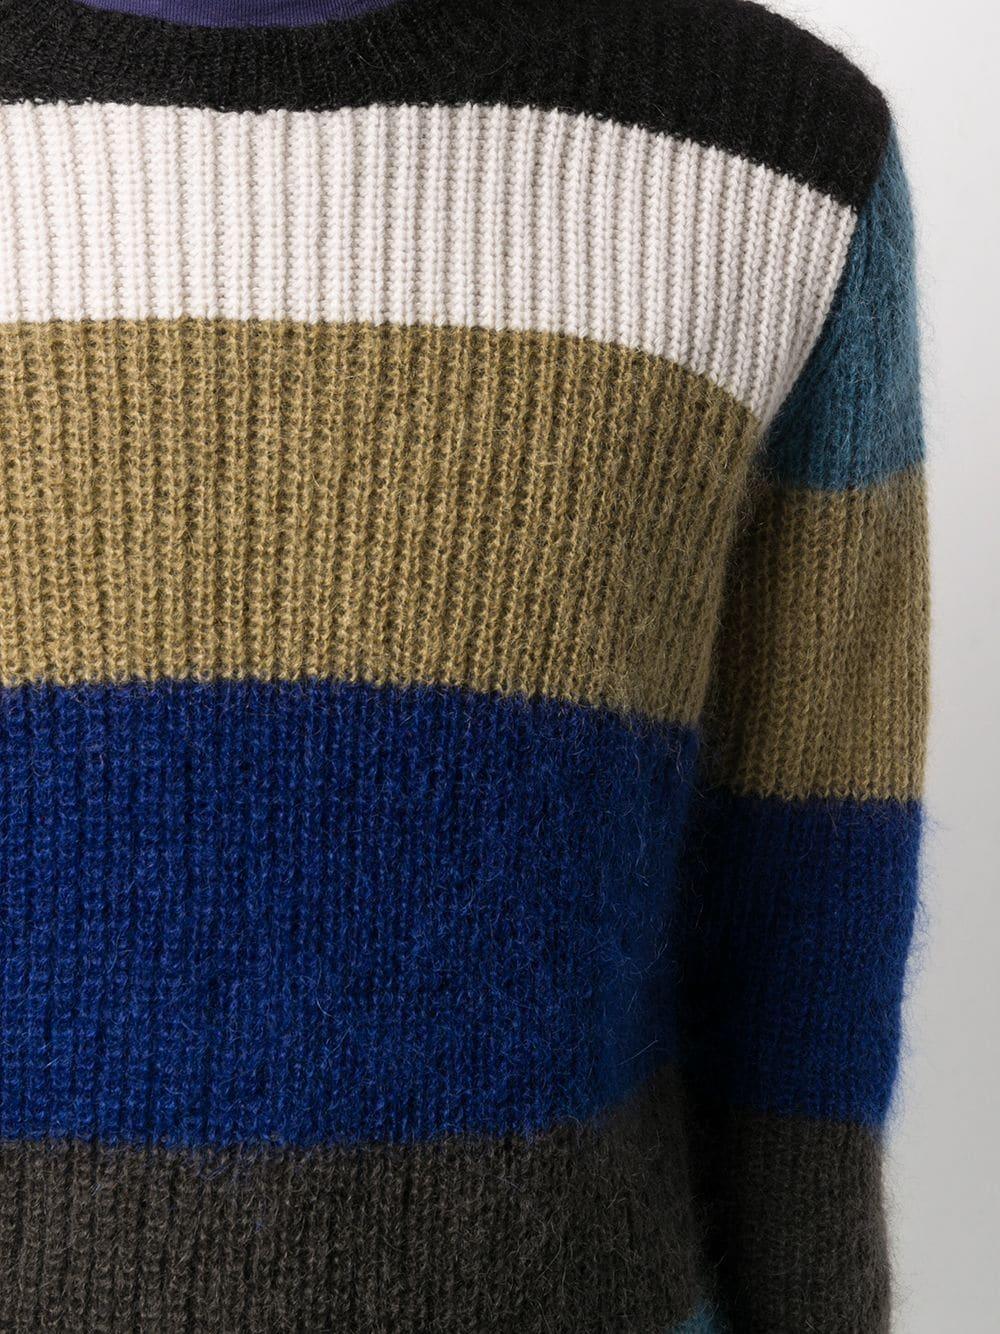 Marni Striped Knitted Jumper in Blue for Men - Lyst